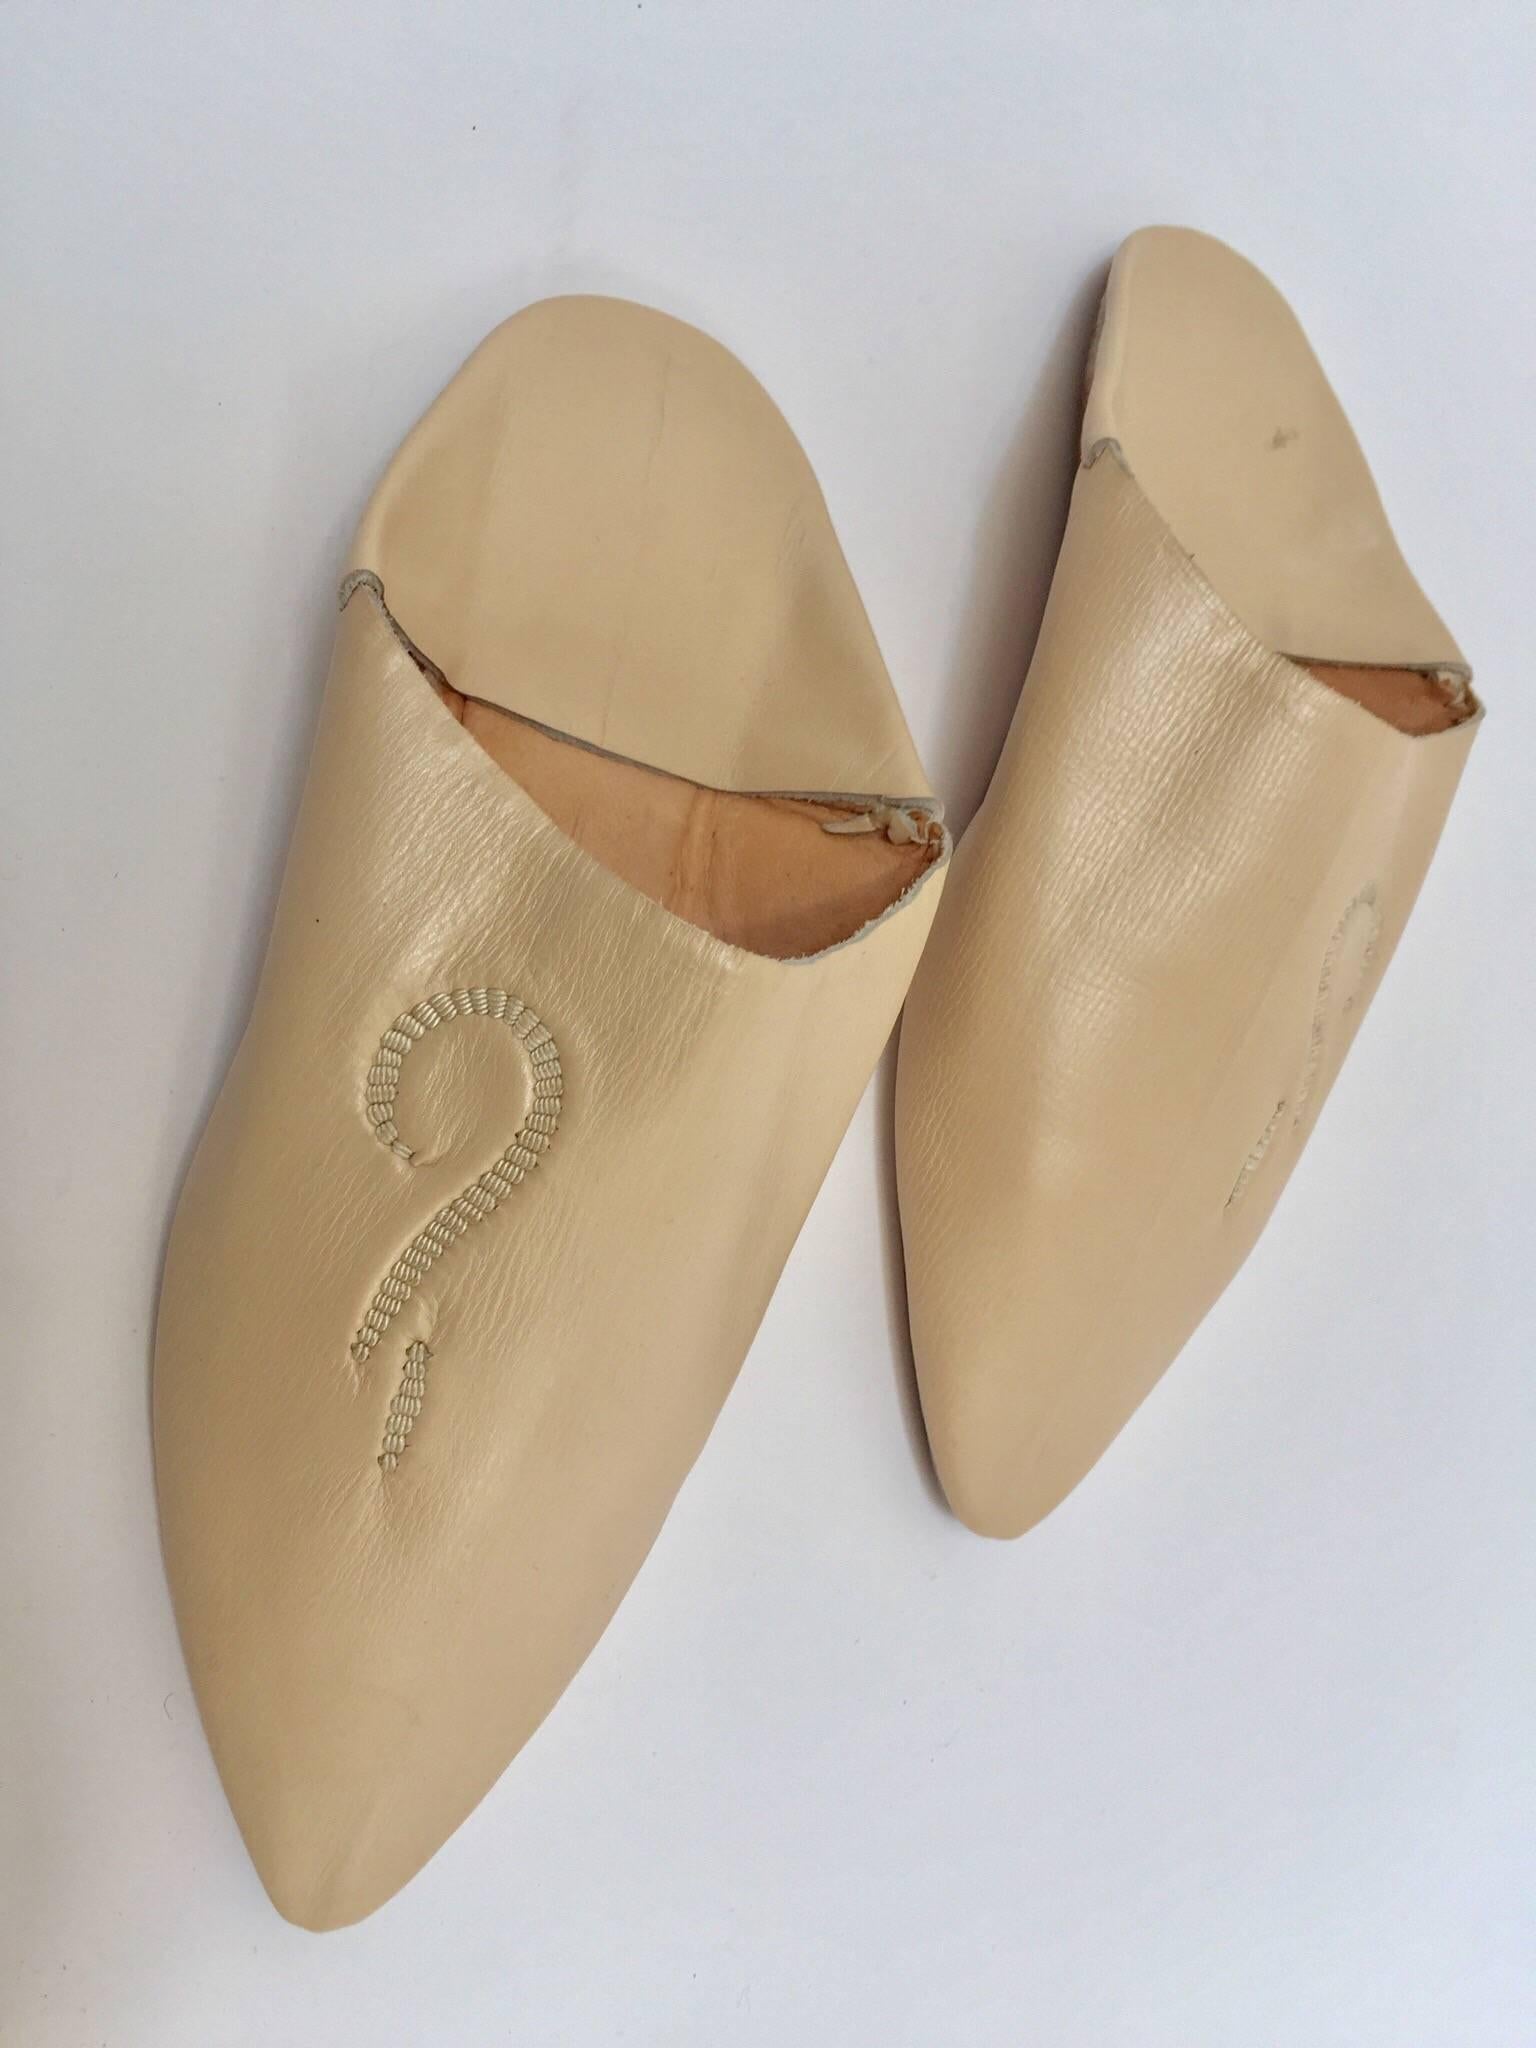 Moroccan leather slippers are handmade to perfection the inside sole is crafted of soft leather.
Hand-sewn sole and handcrafted in Fez Morocco. 
You won't want to take the Moroccan babouches off your feet.
Moroccan shoes to wear around the POOL or